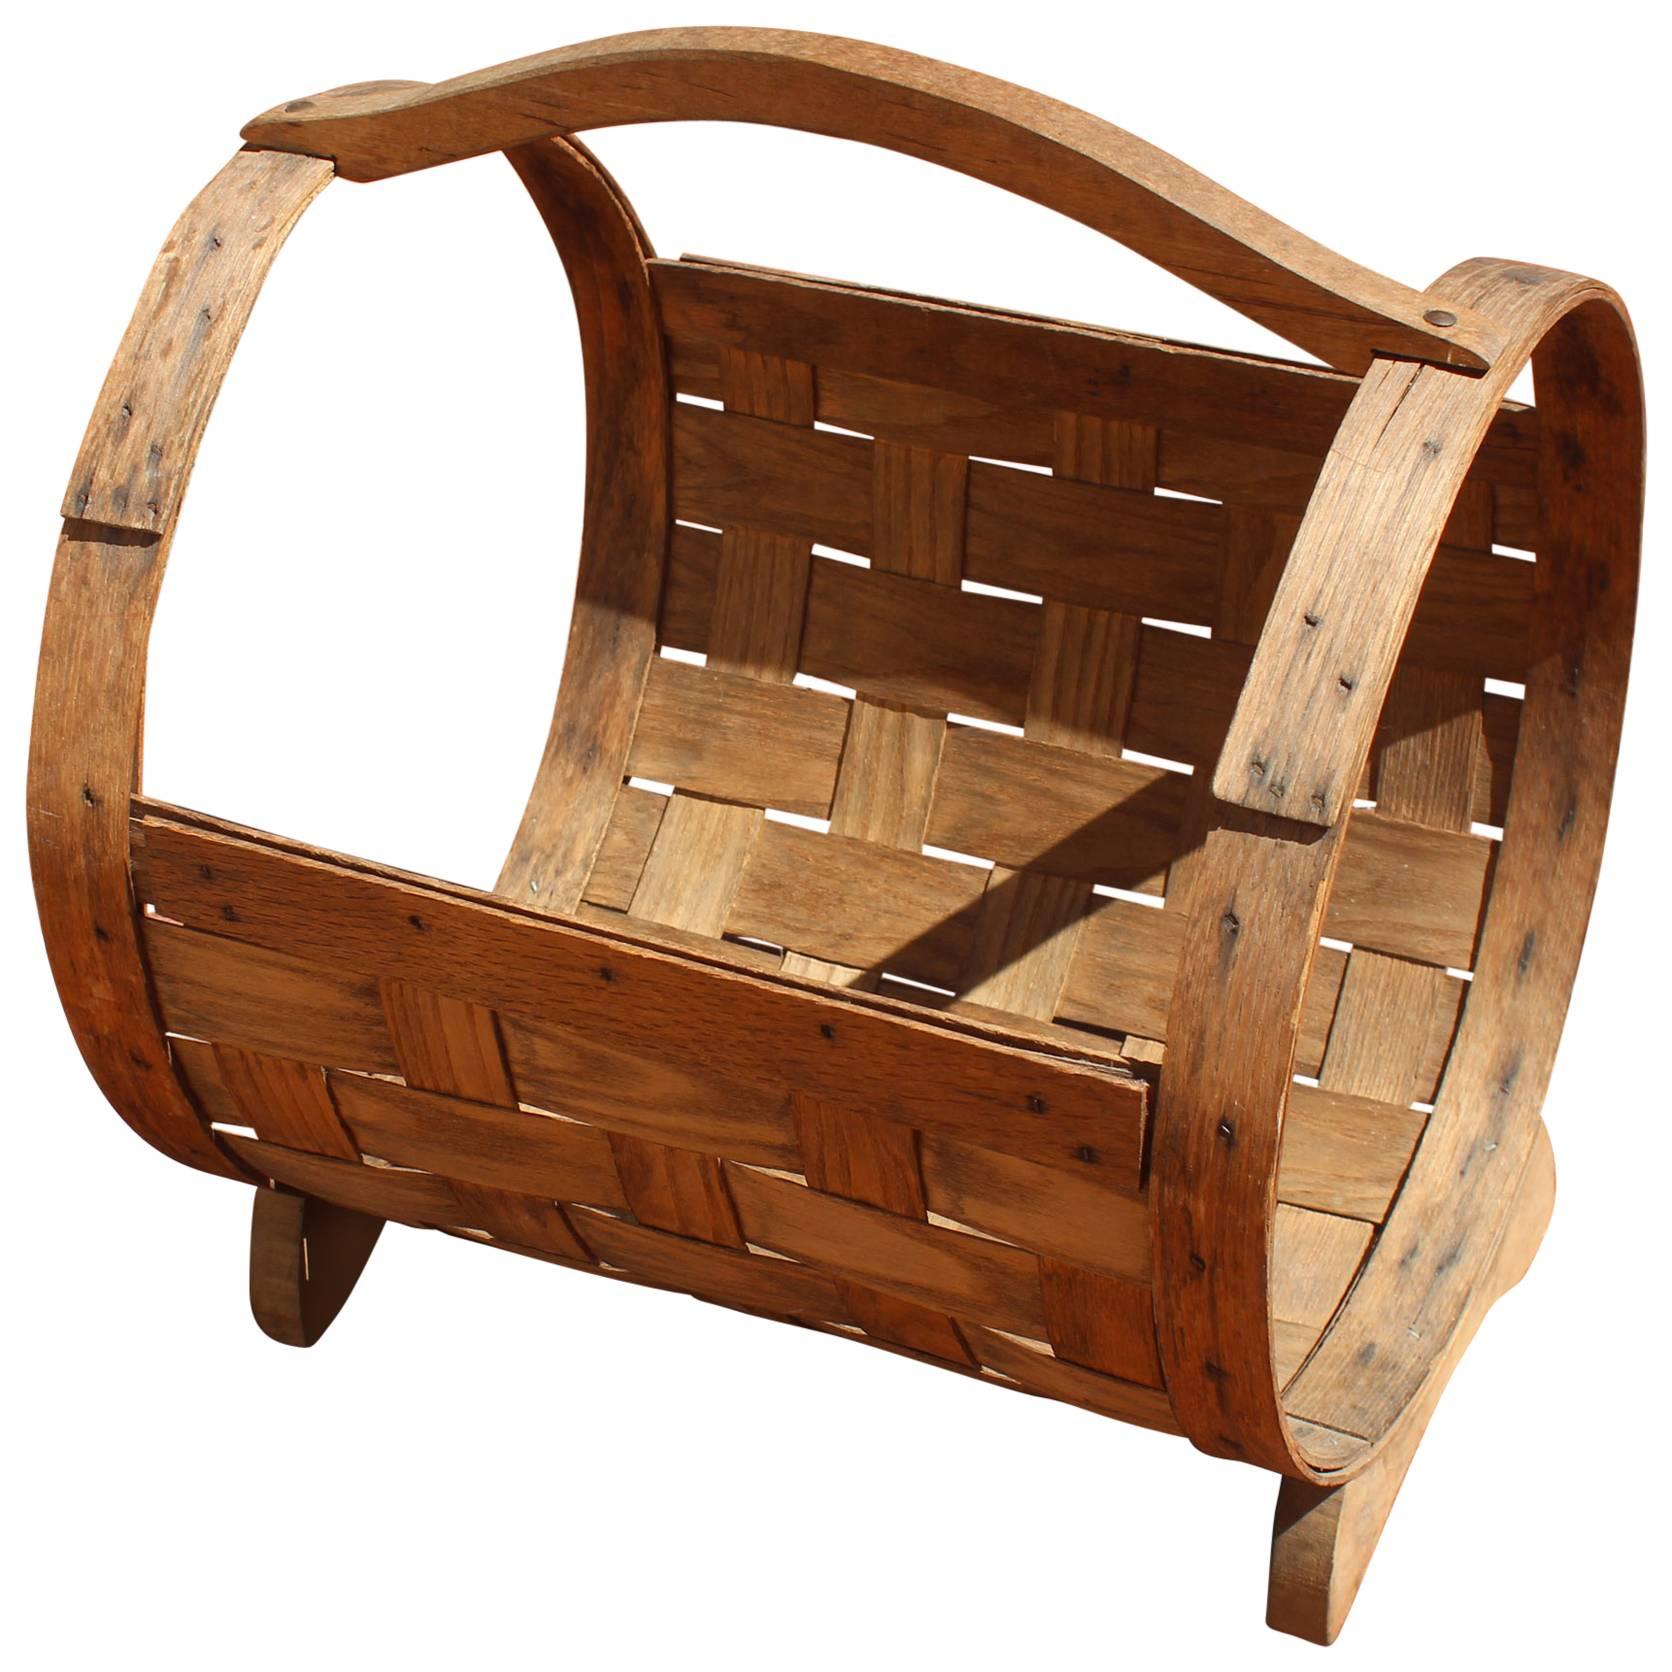 Woven Firewood Holder/Carrier For Sale